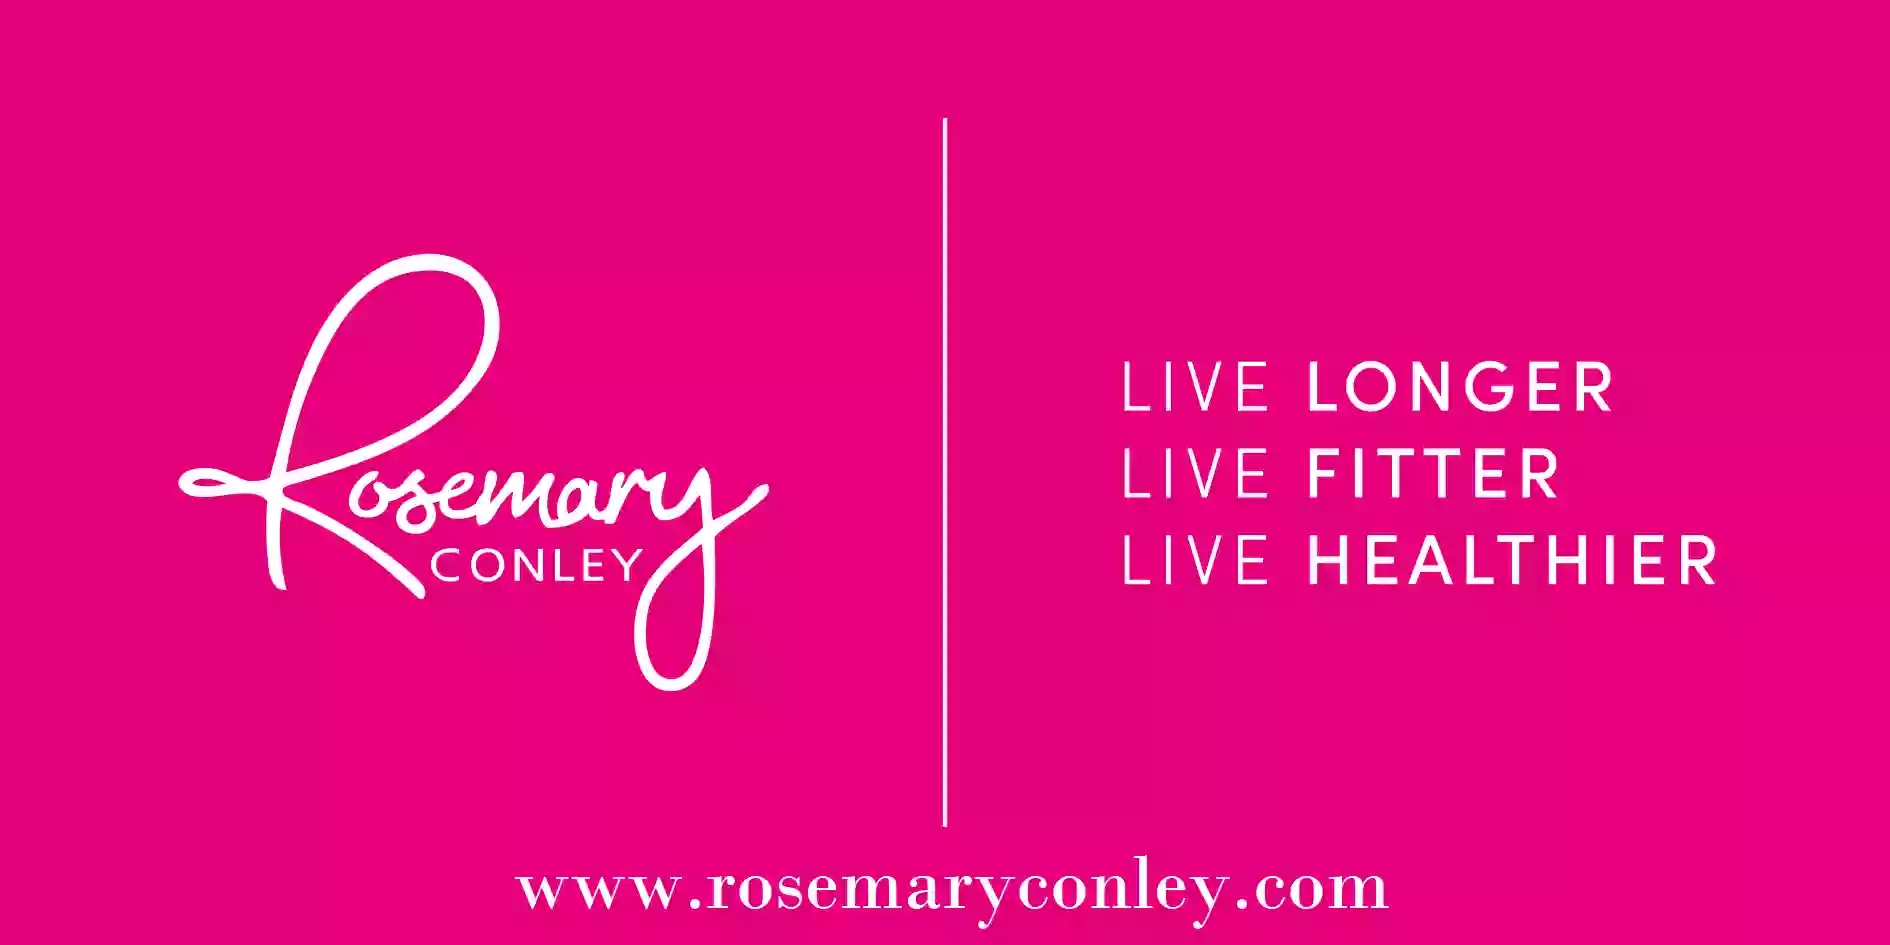 Rosemary Conley Diet & Fitness Club